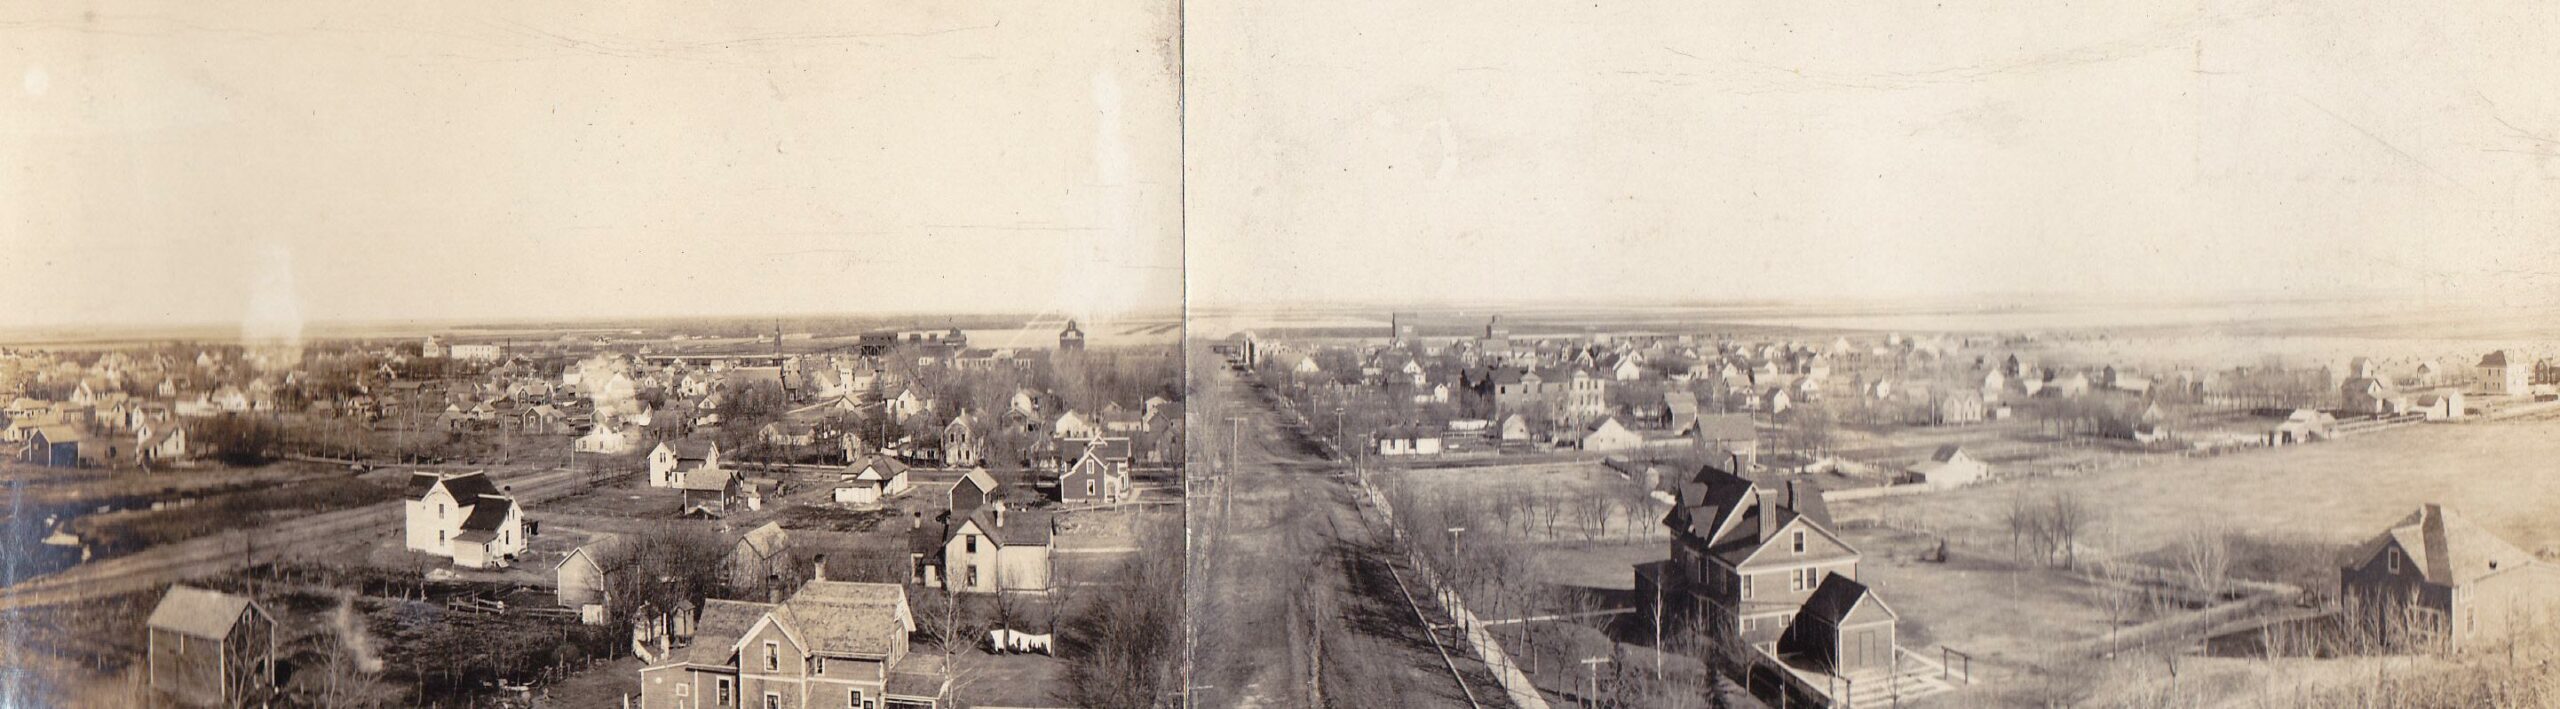 Park River 1910 looking east